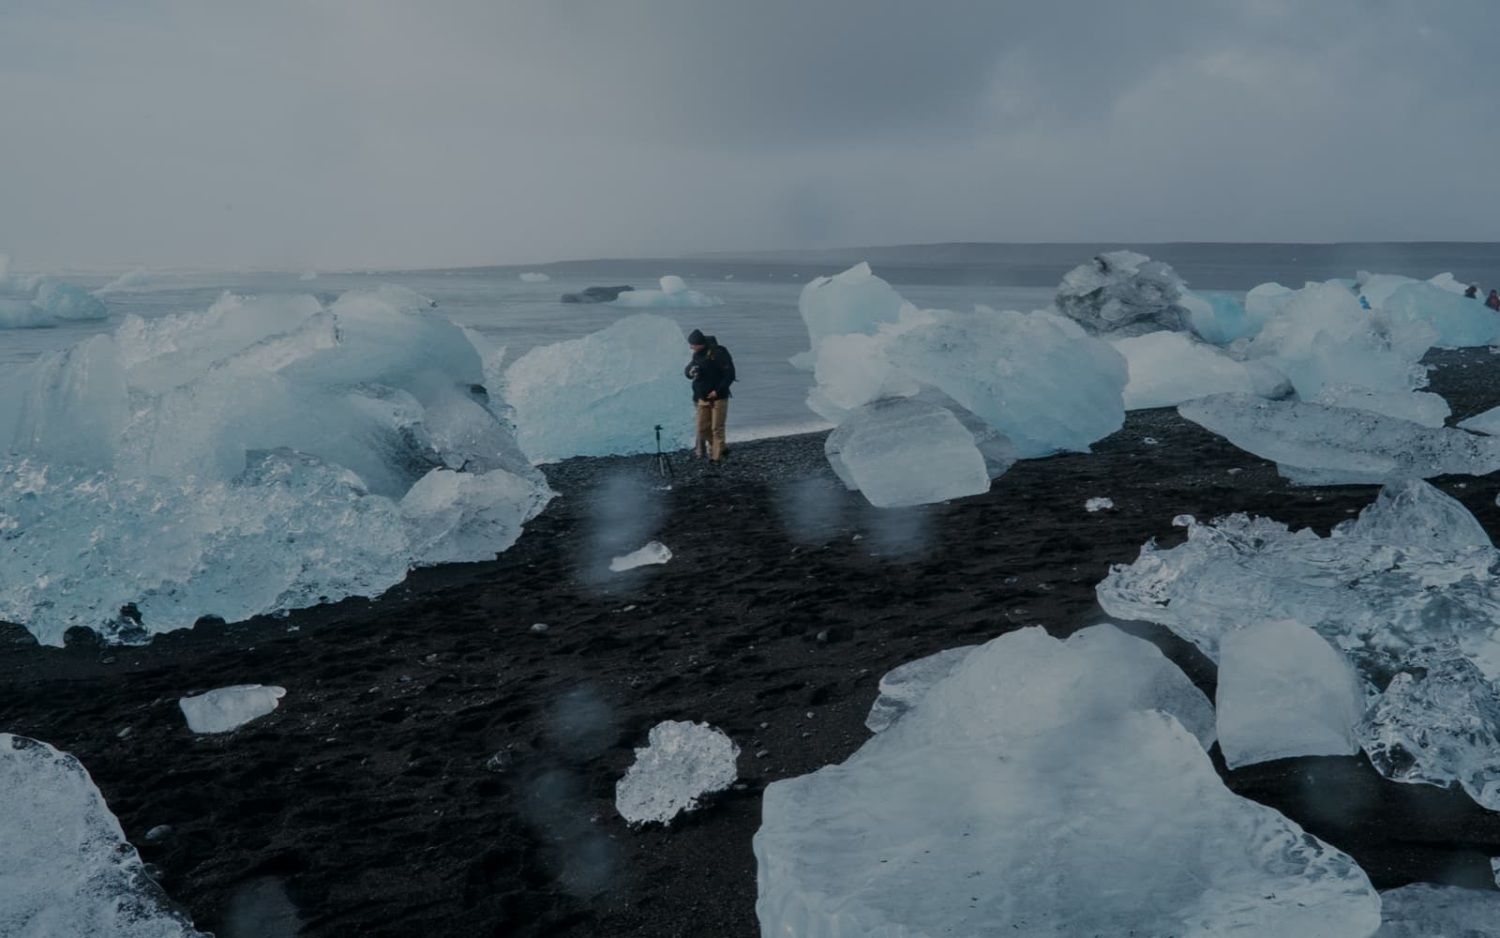 Man surveying the breaking ice sheets